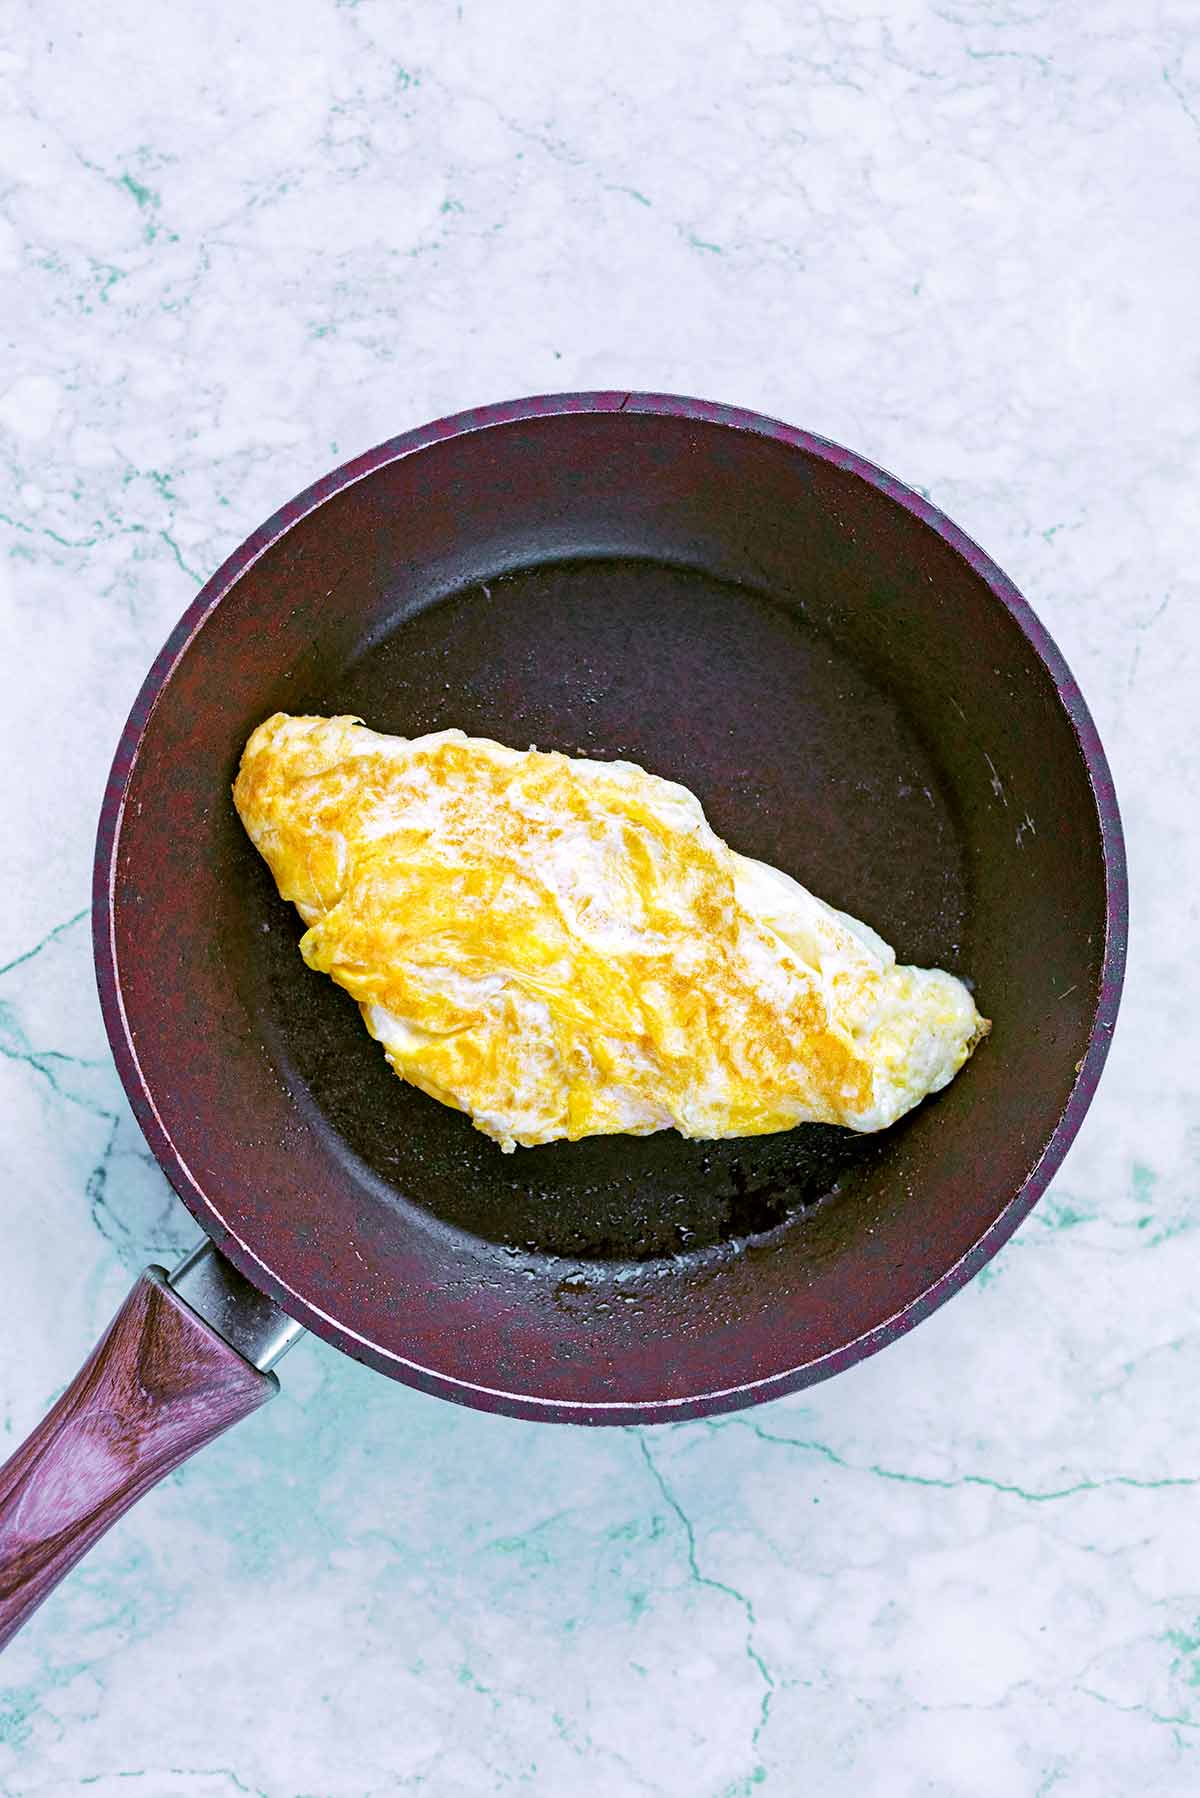 A frying pan with a folded omelette in it